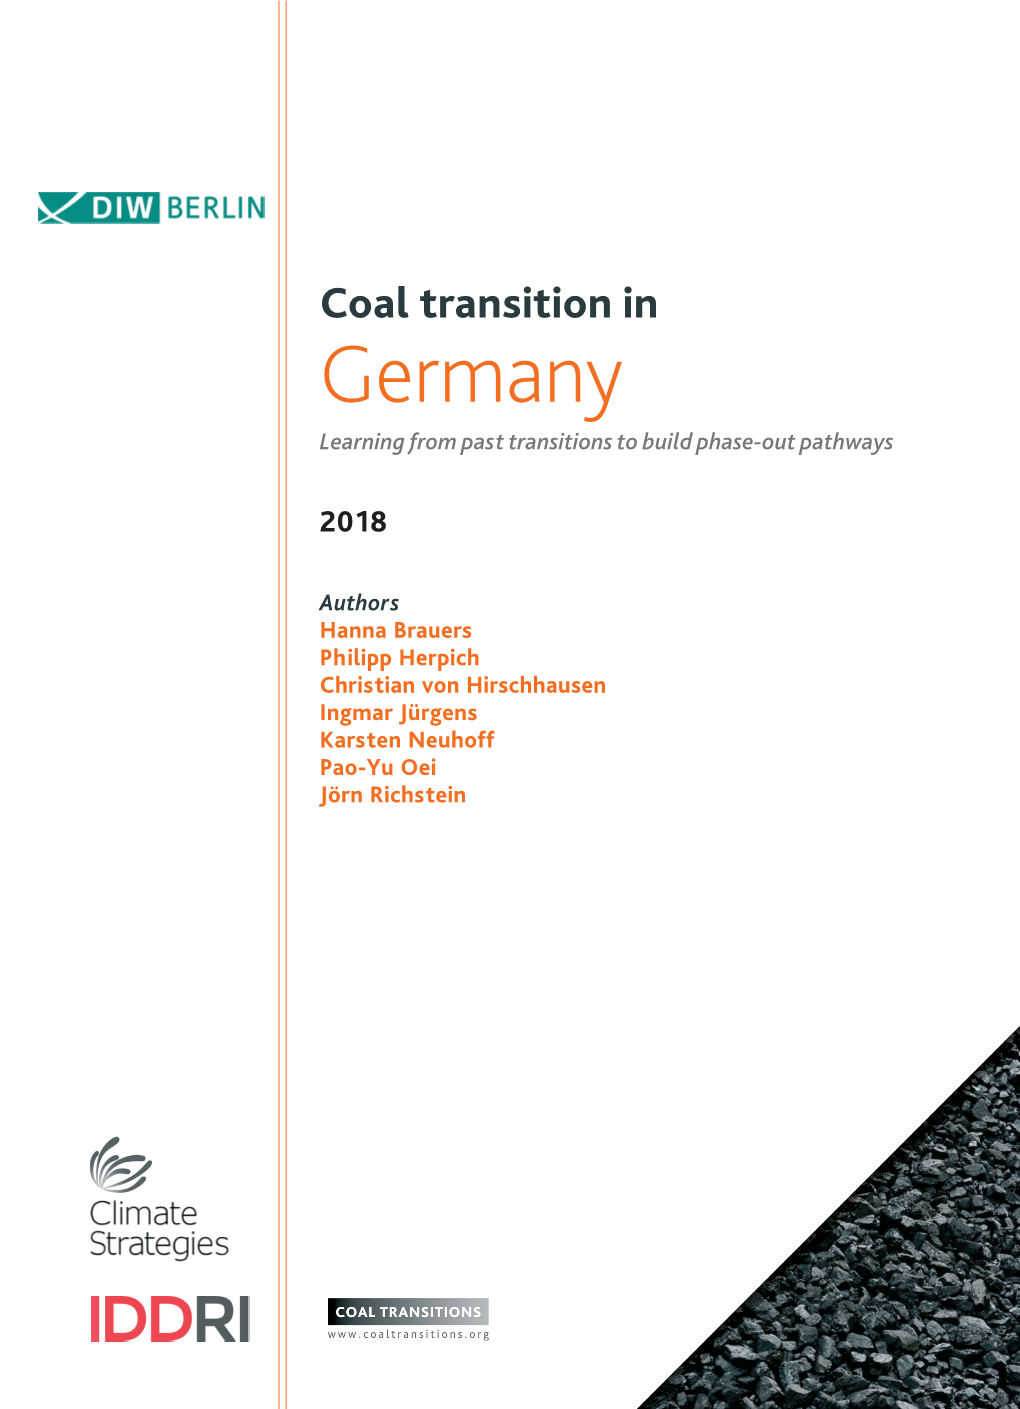 Coal Transition in Germany Learning from Past Transitions to Build Phase-Out Pathways